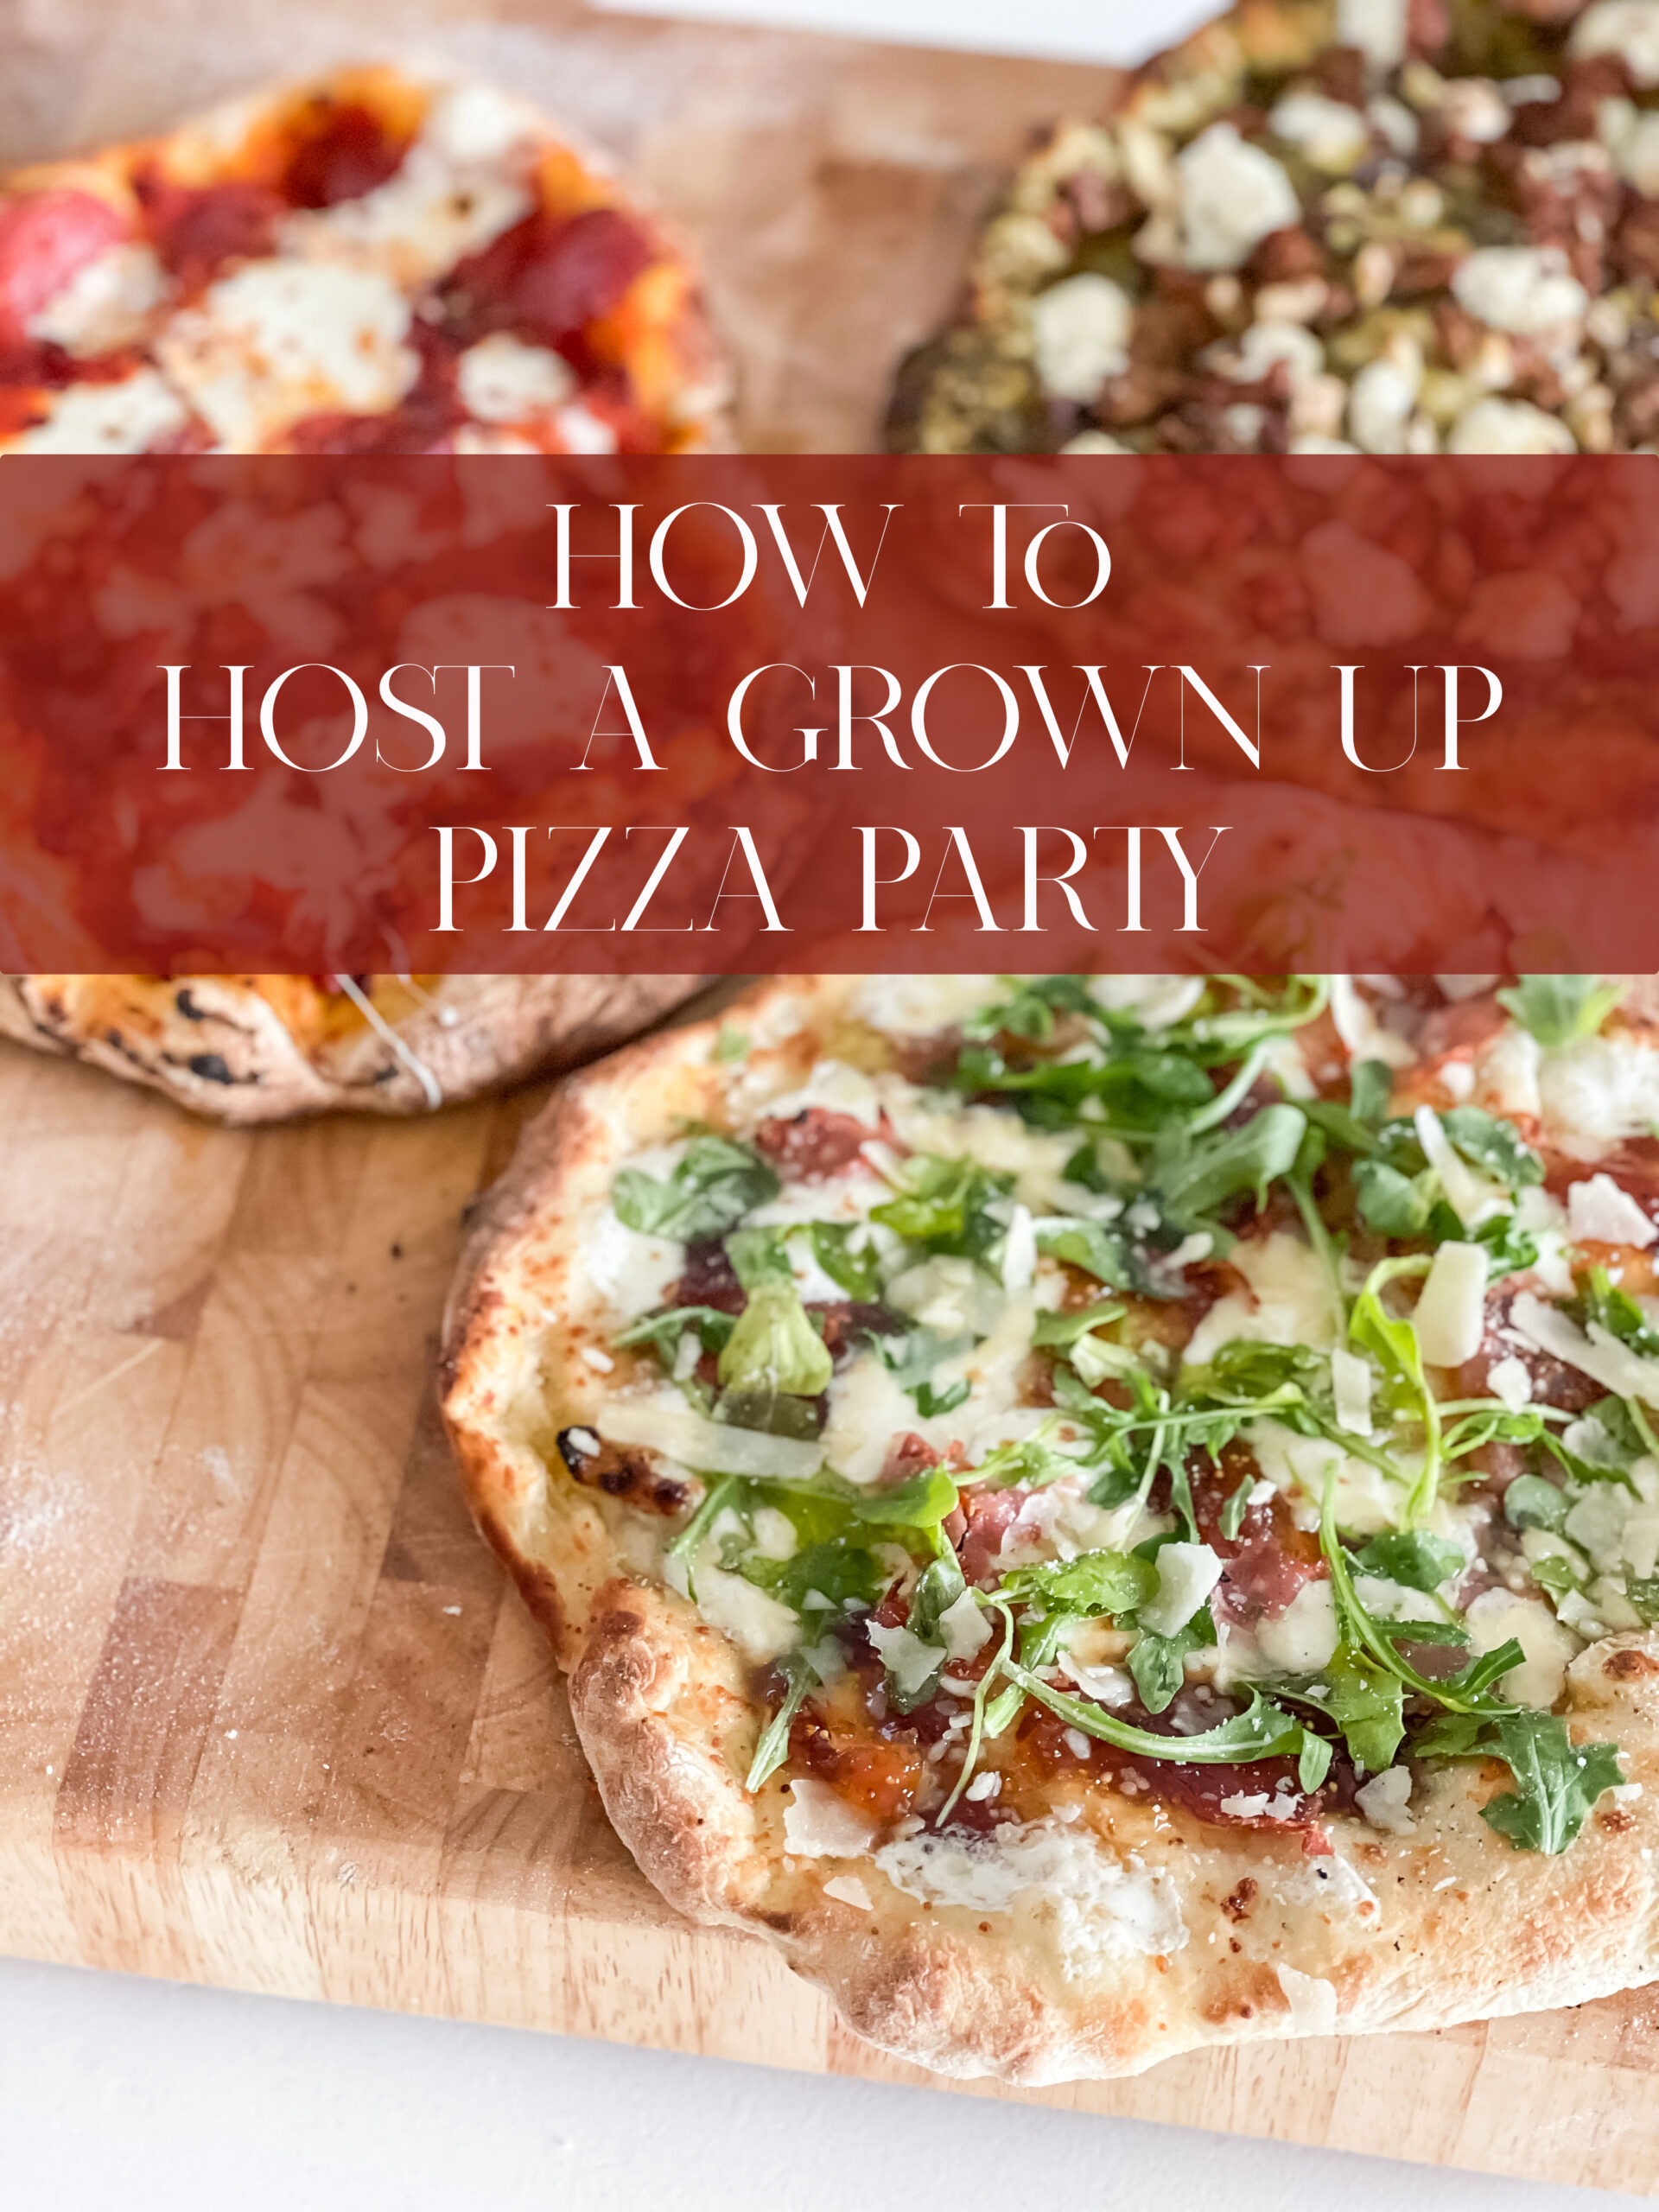 How to host a grown up pizza party. Tips on tablescape, toppings and our new favorite reasonably priced wood fire oven - the Ooni!